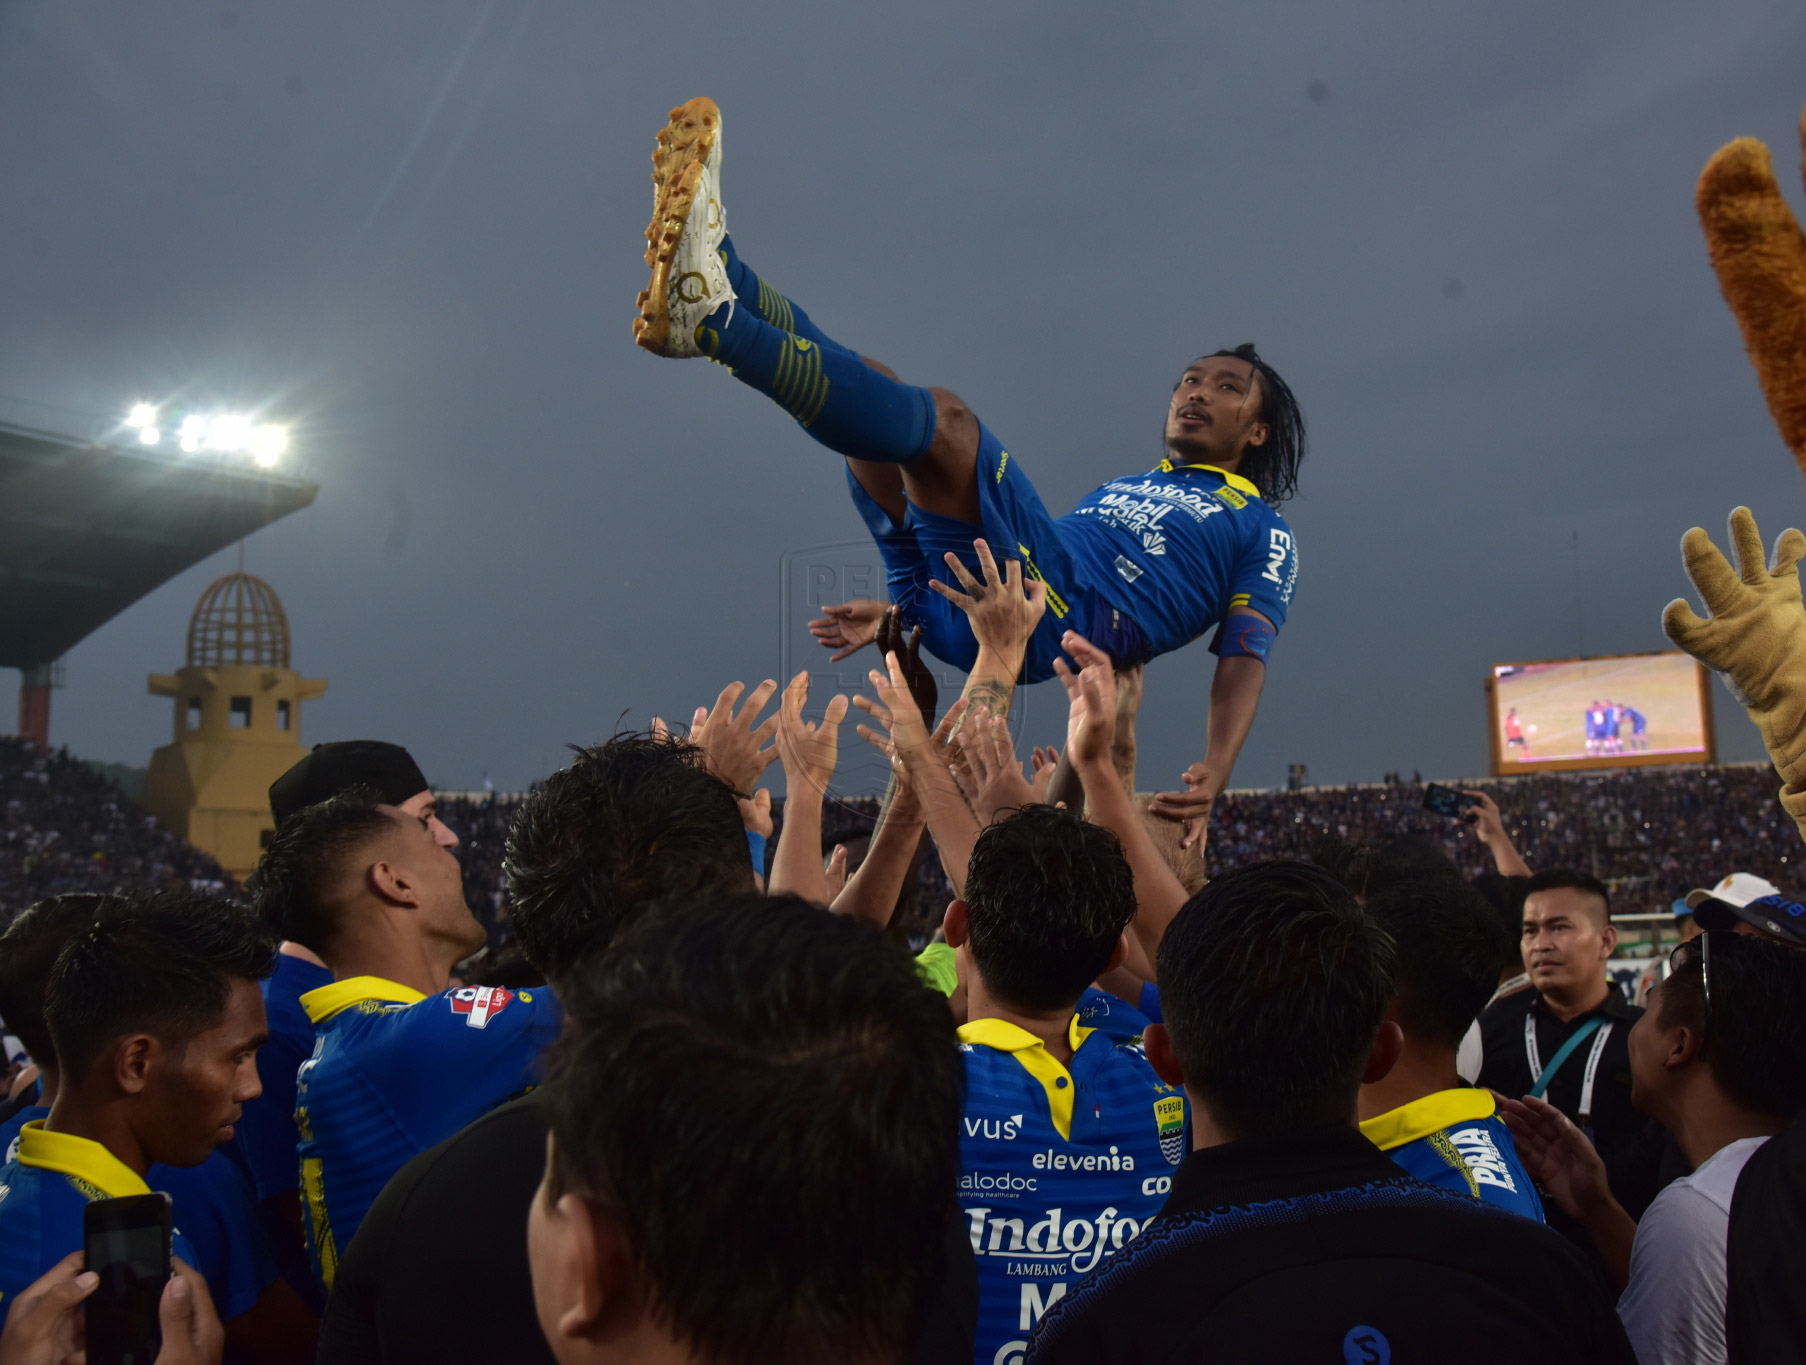 Persib to Retire the Number 24 Shirt to Honor Hariono